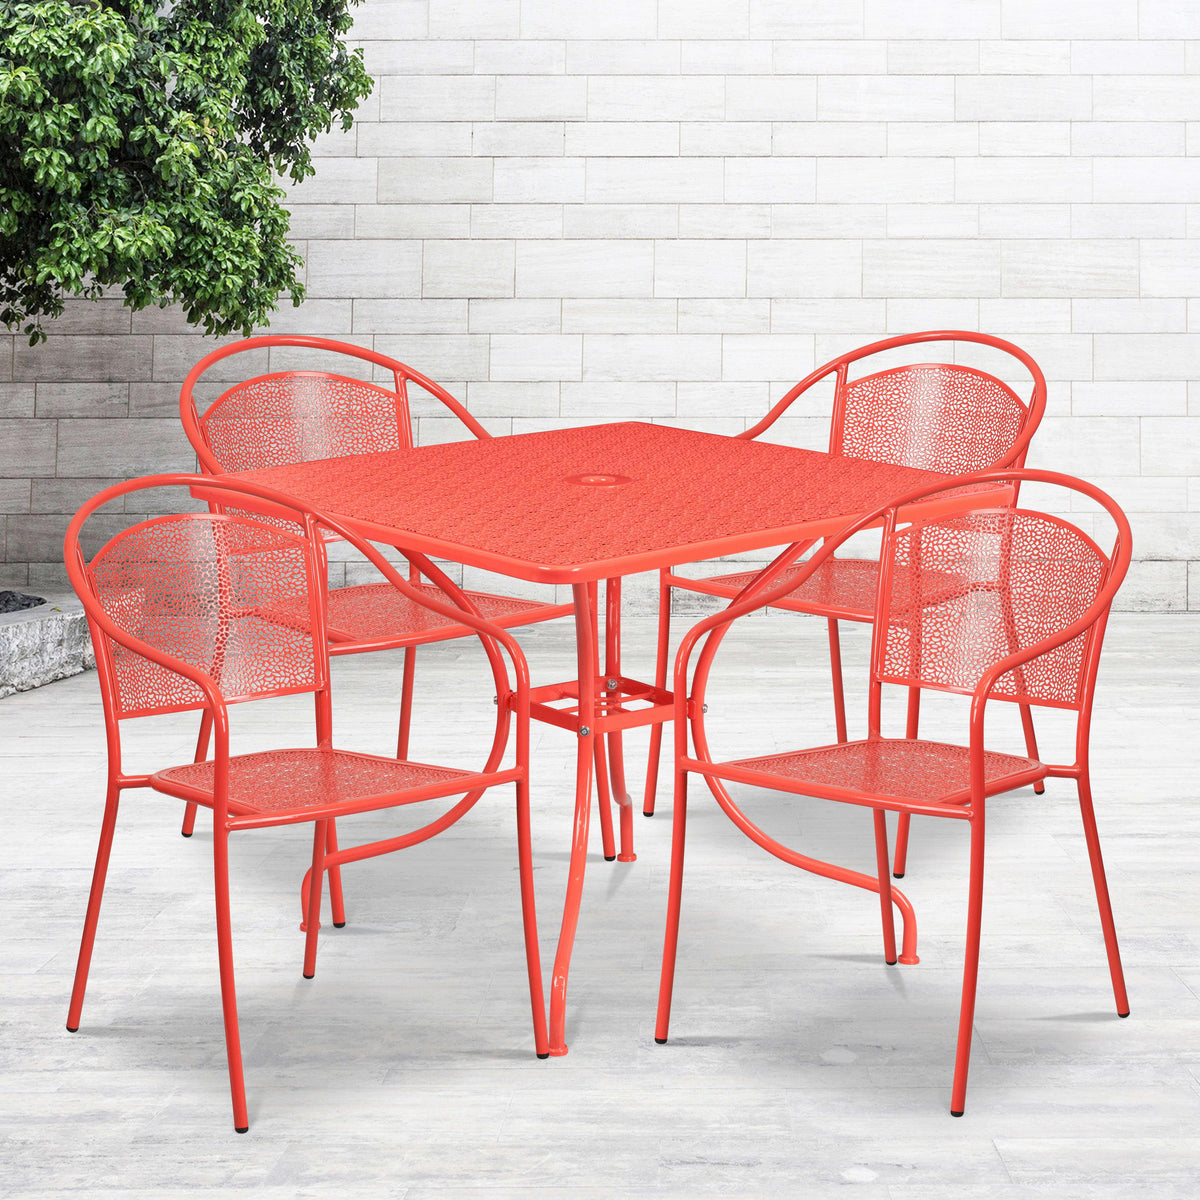 Coral |#| 35.5inch Square Coral Indoor-Outdoor Steel Patio Table Set w/ 4 Round Back Chairs